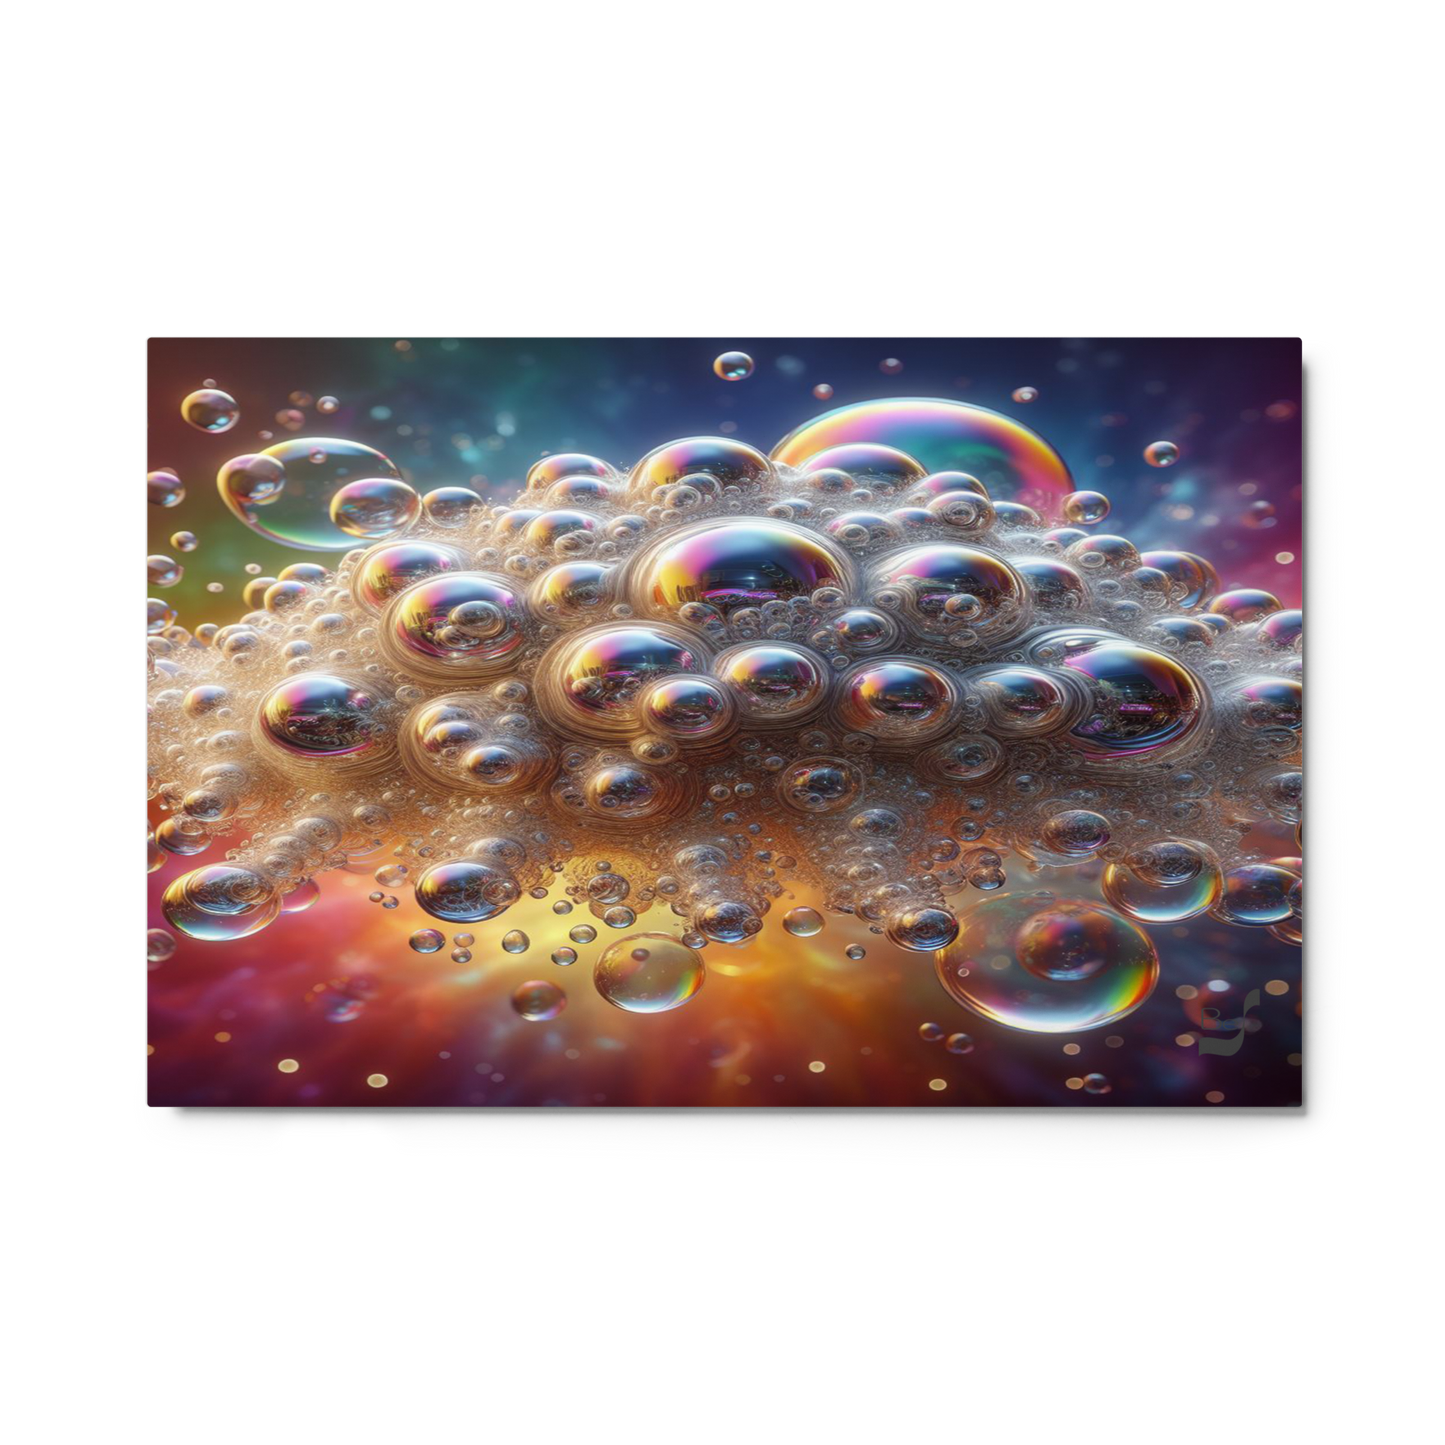 Bubbles of Ethereal Cluster BeSculpt Metal Cosmic Fantasy Art